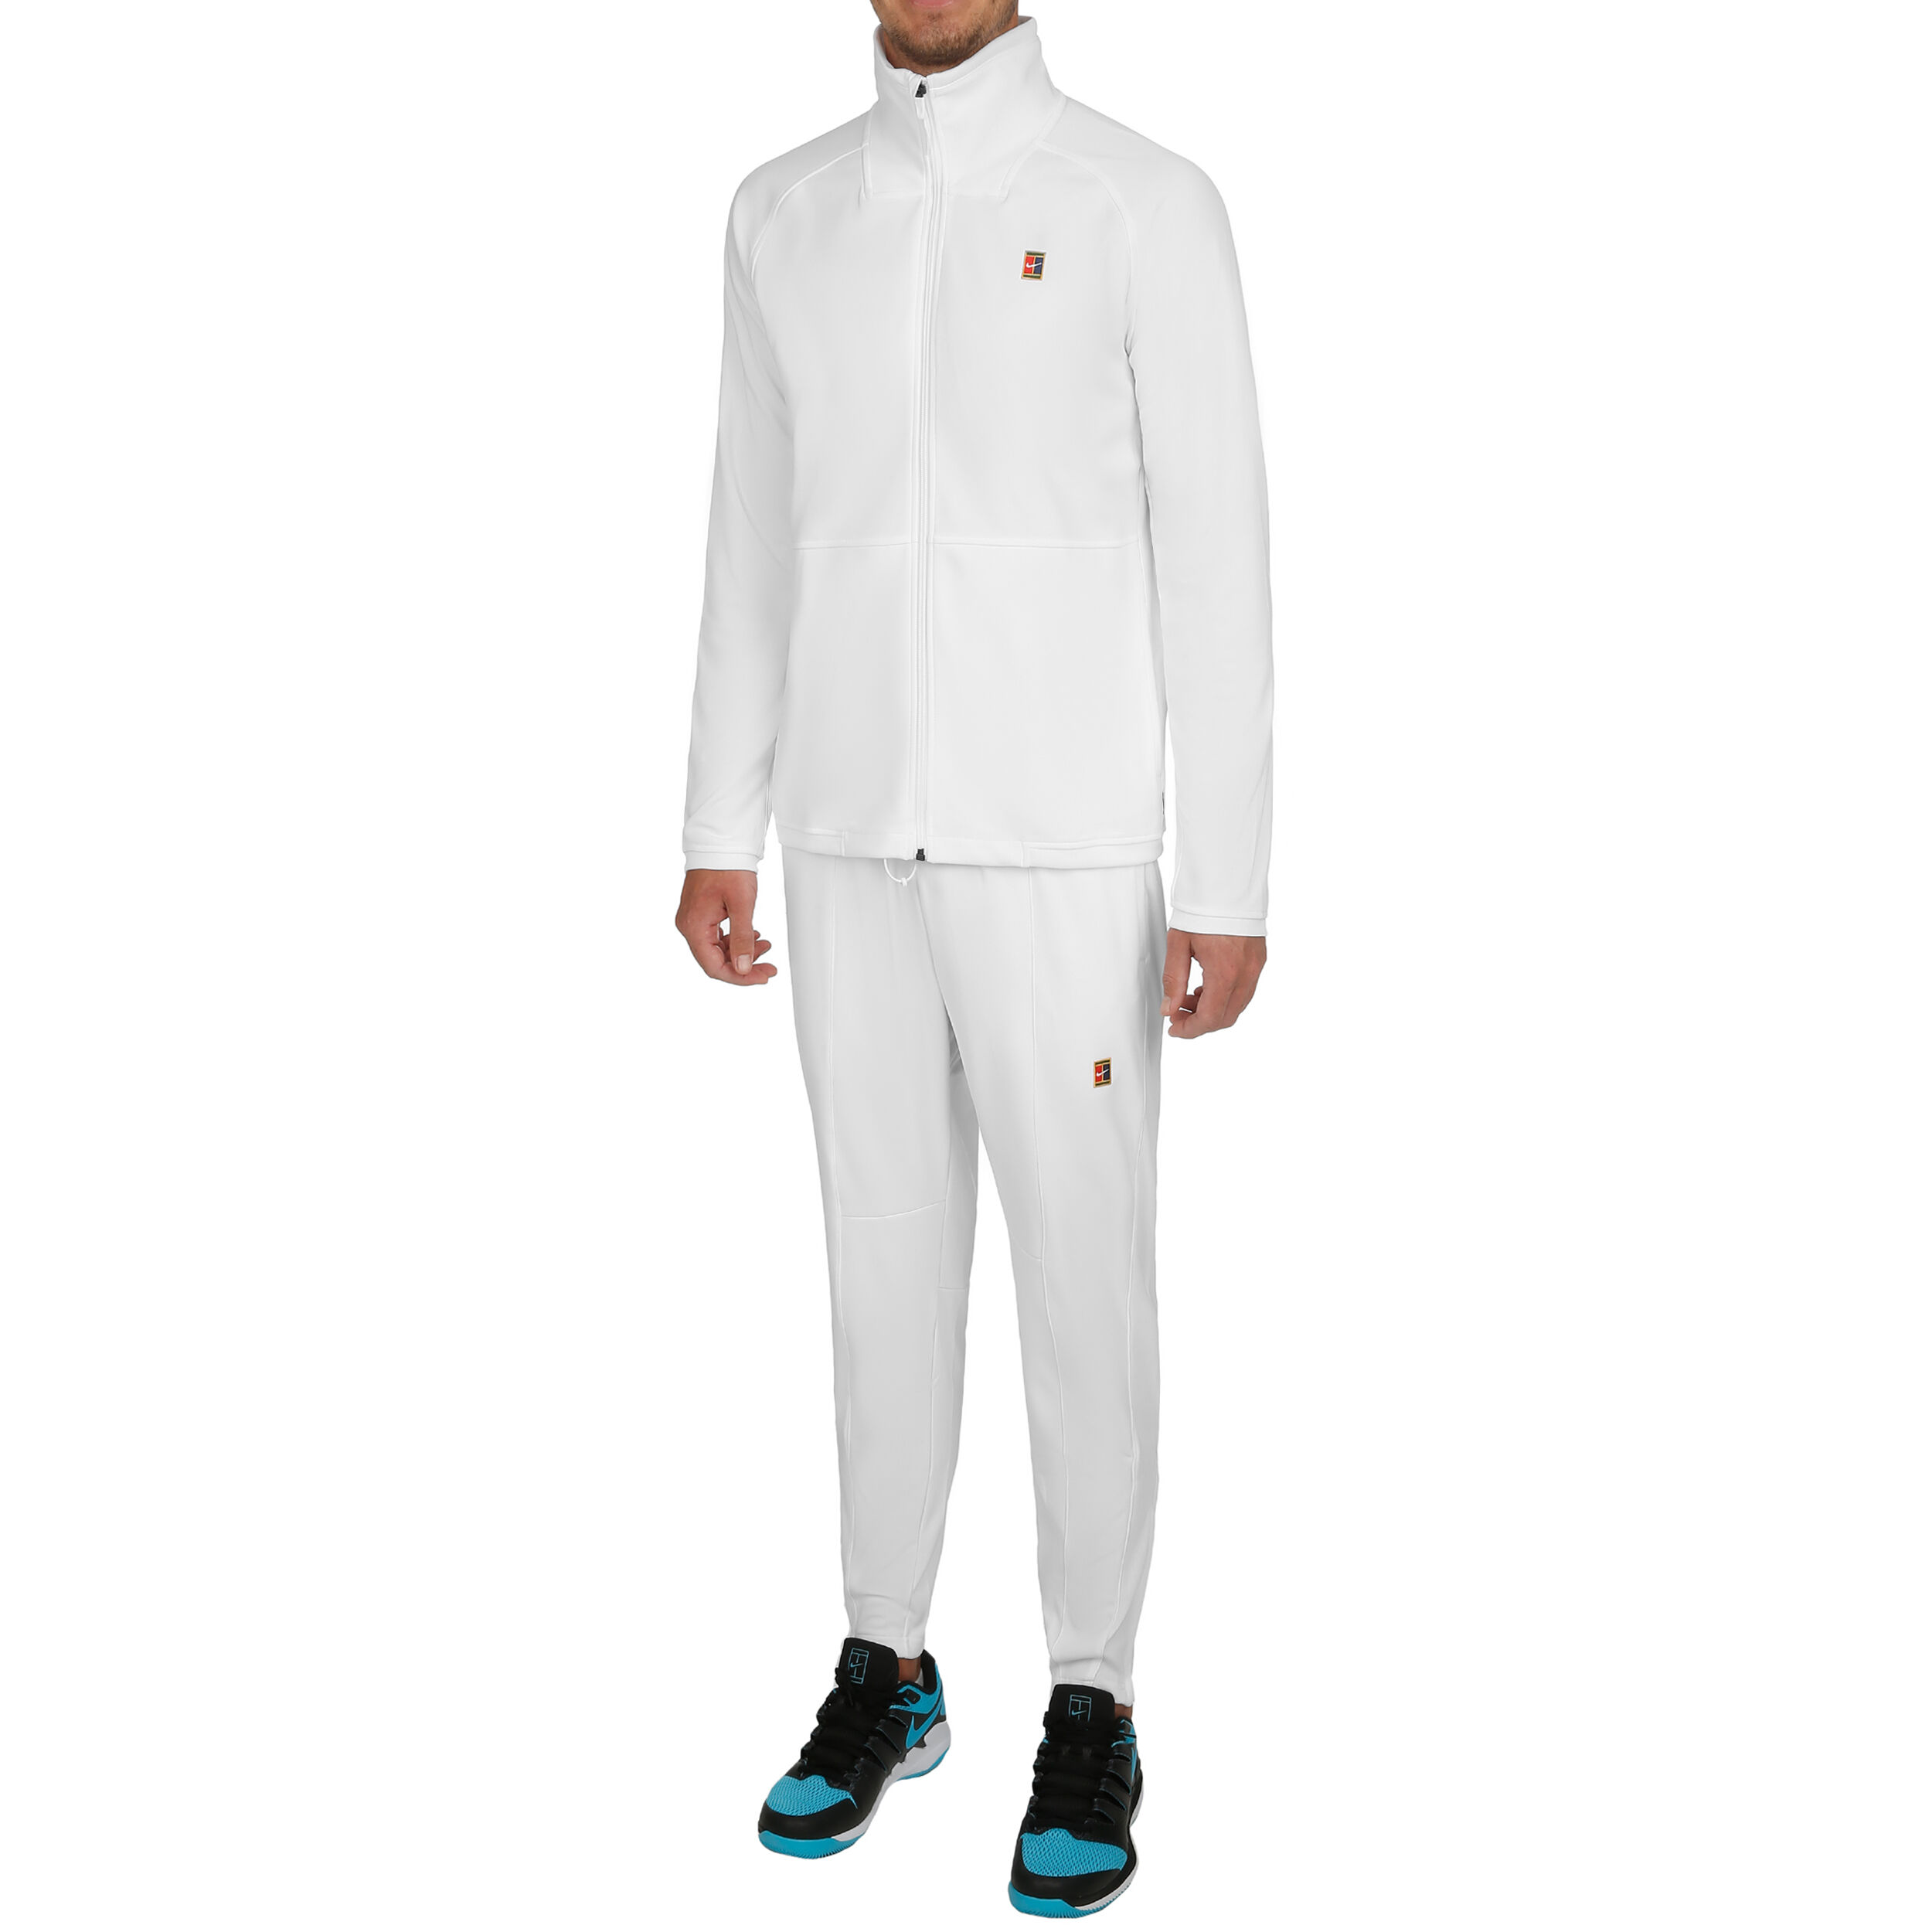 Nike Court Chándal Hombres - Blanco, Rojo compra online | Tennis-Point